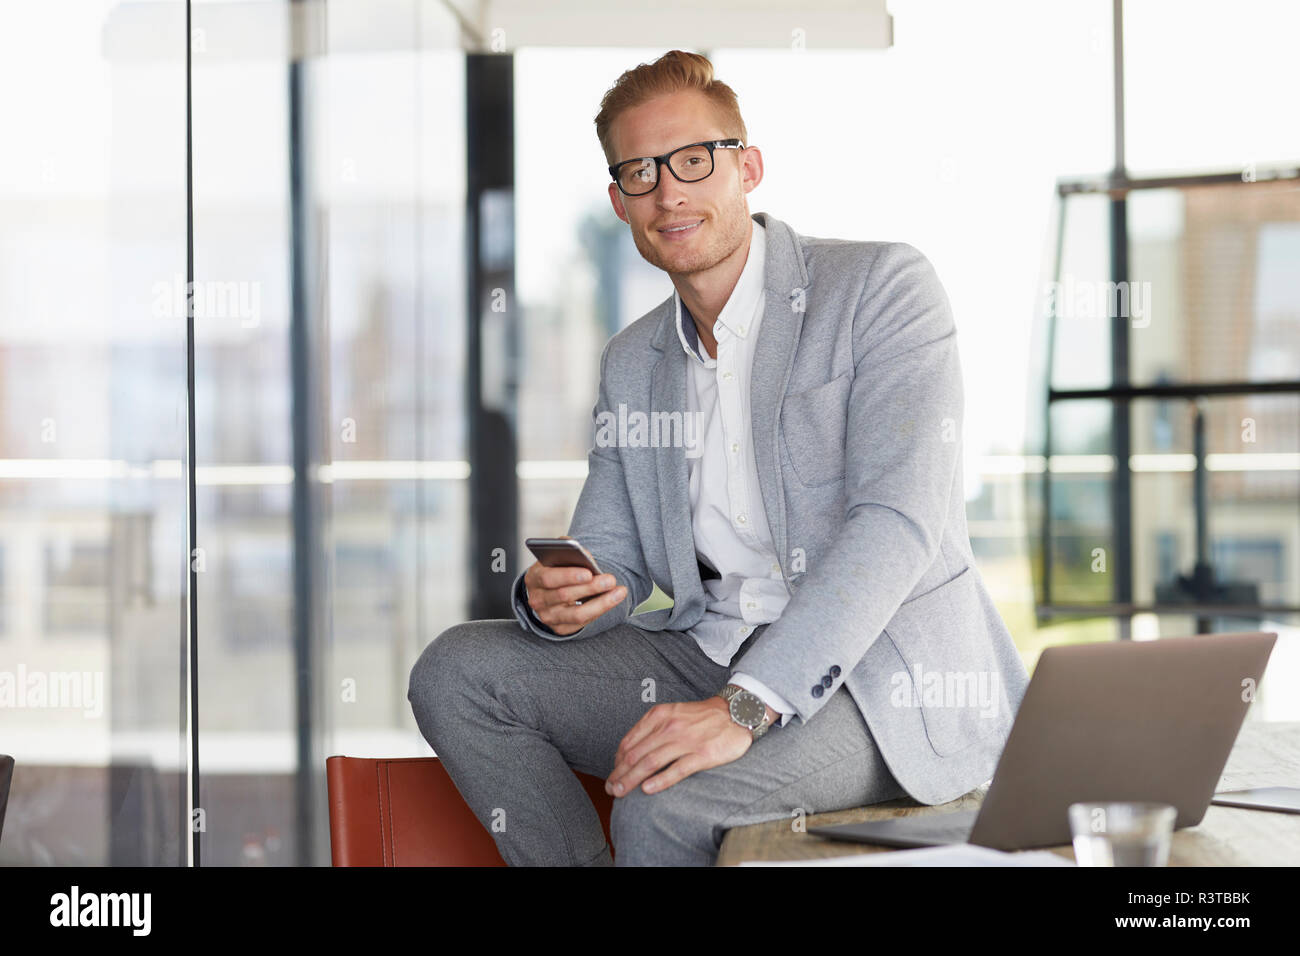 Portrait of smiling businessman with laptop and cell phone sitting on desk in office Stock Photo